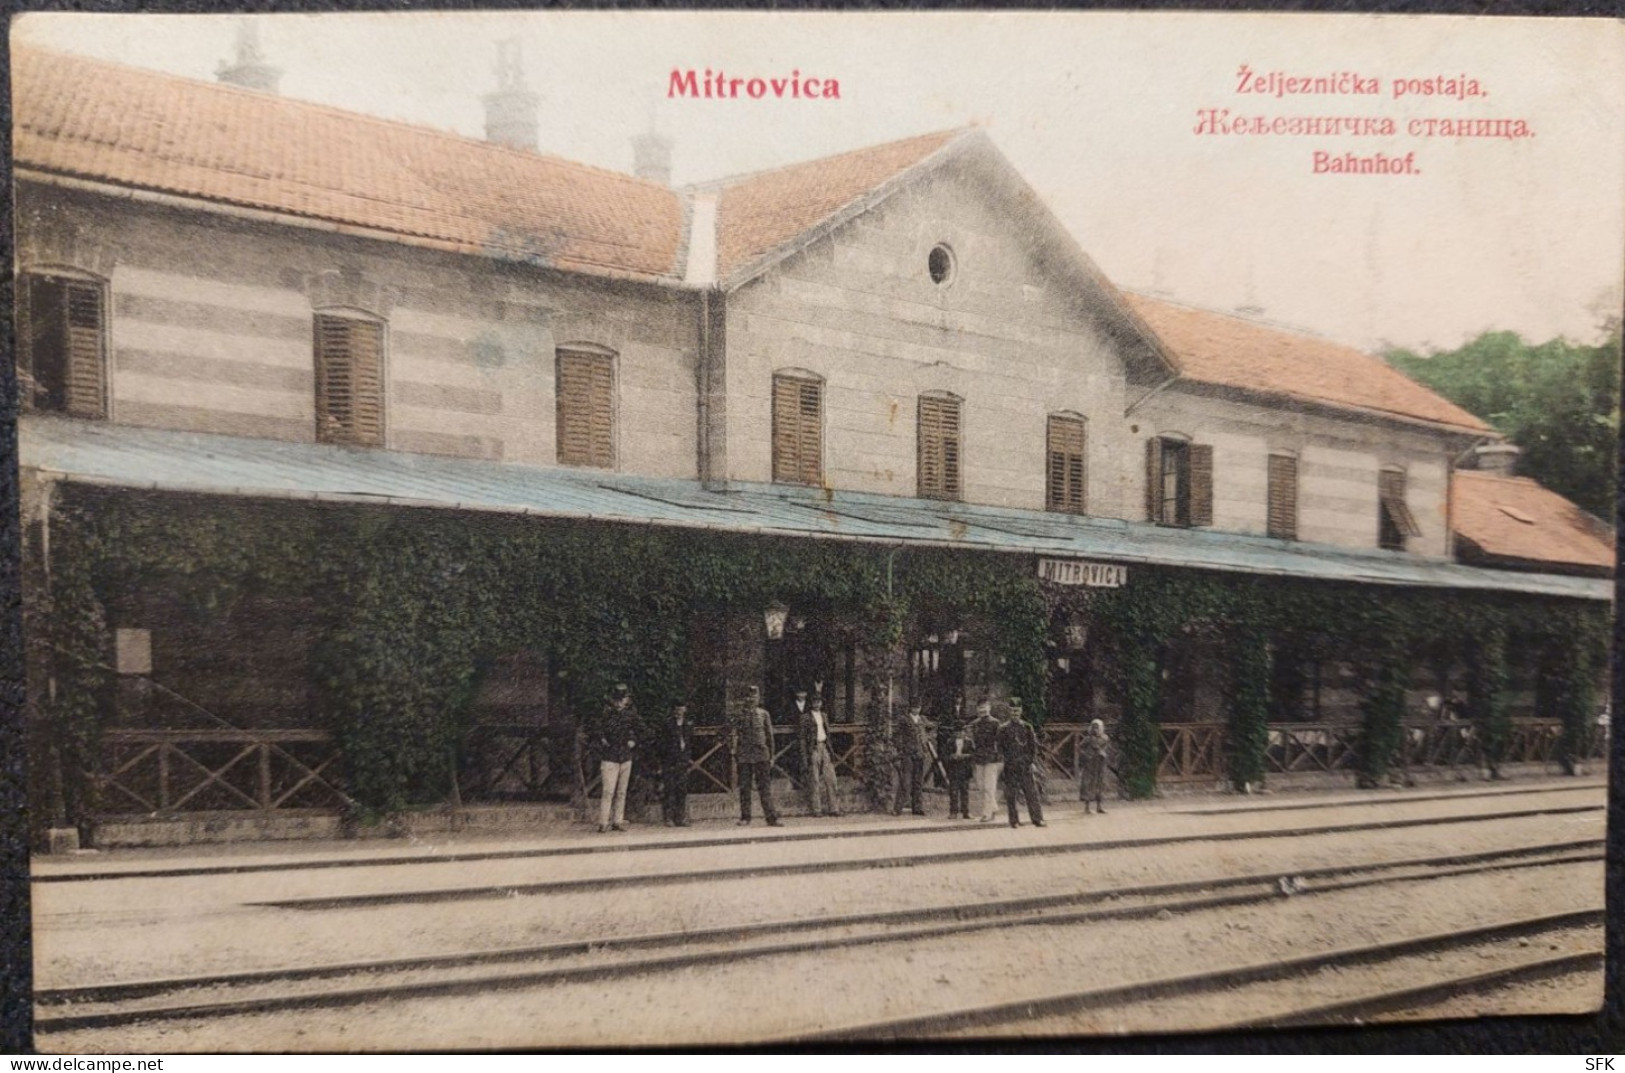 764_001 1904. Mitrovica in Slavonia today Croatia, Railway station with people and Austrohungary soldiers..jpg